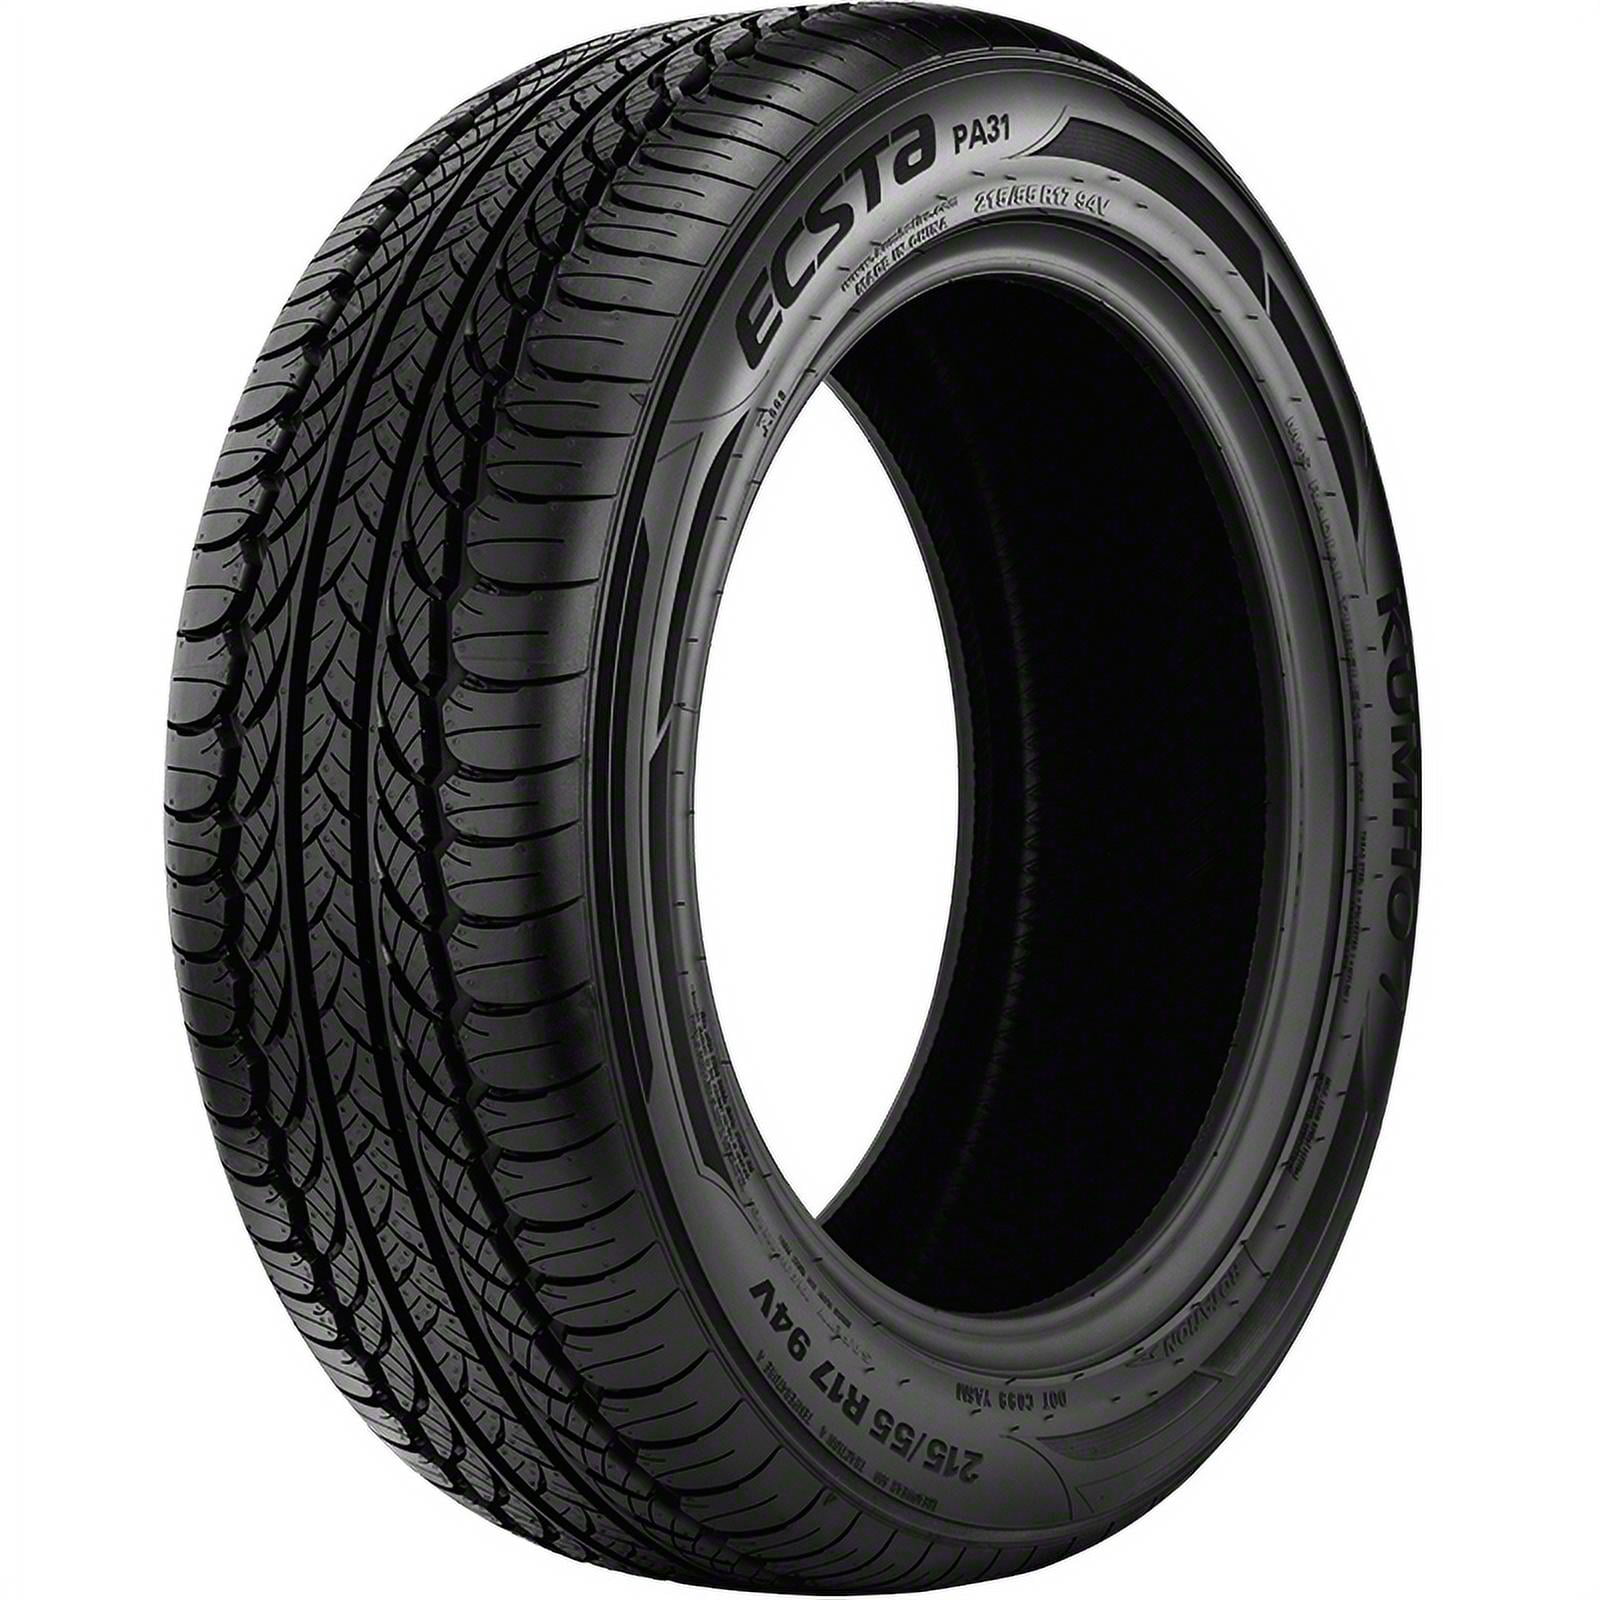 1x NEW 195/60r16c Van Sunwide Budget Tyre One 195 60 16 Commercial Tyres x1